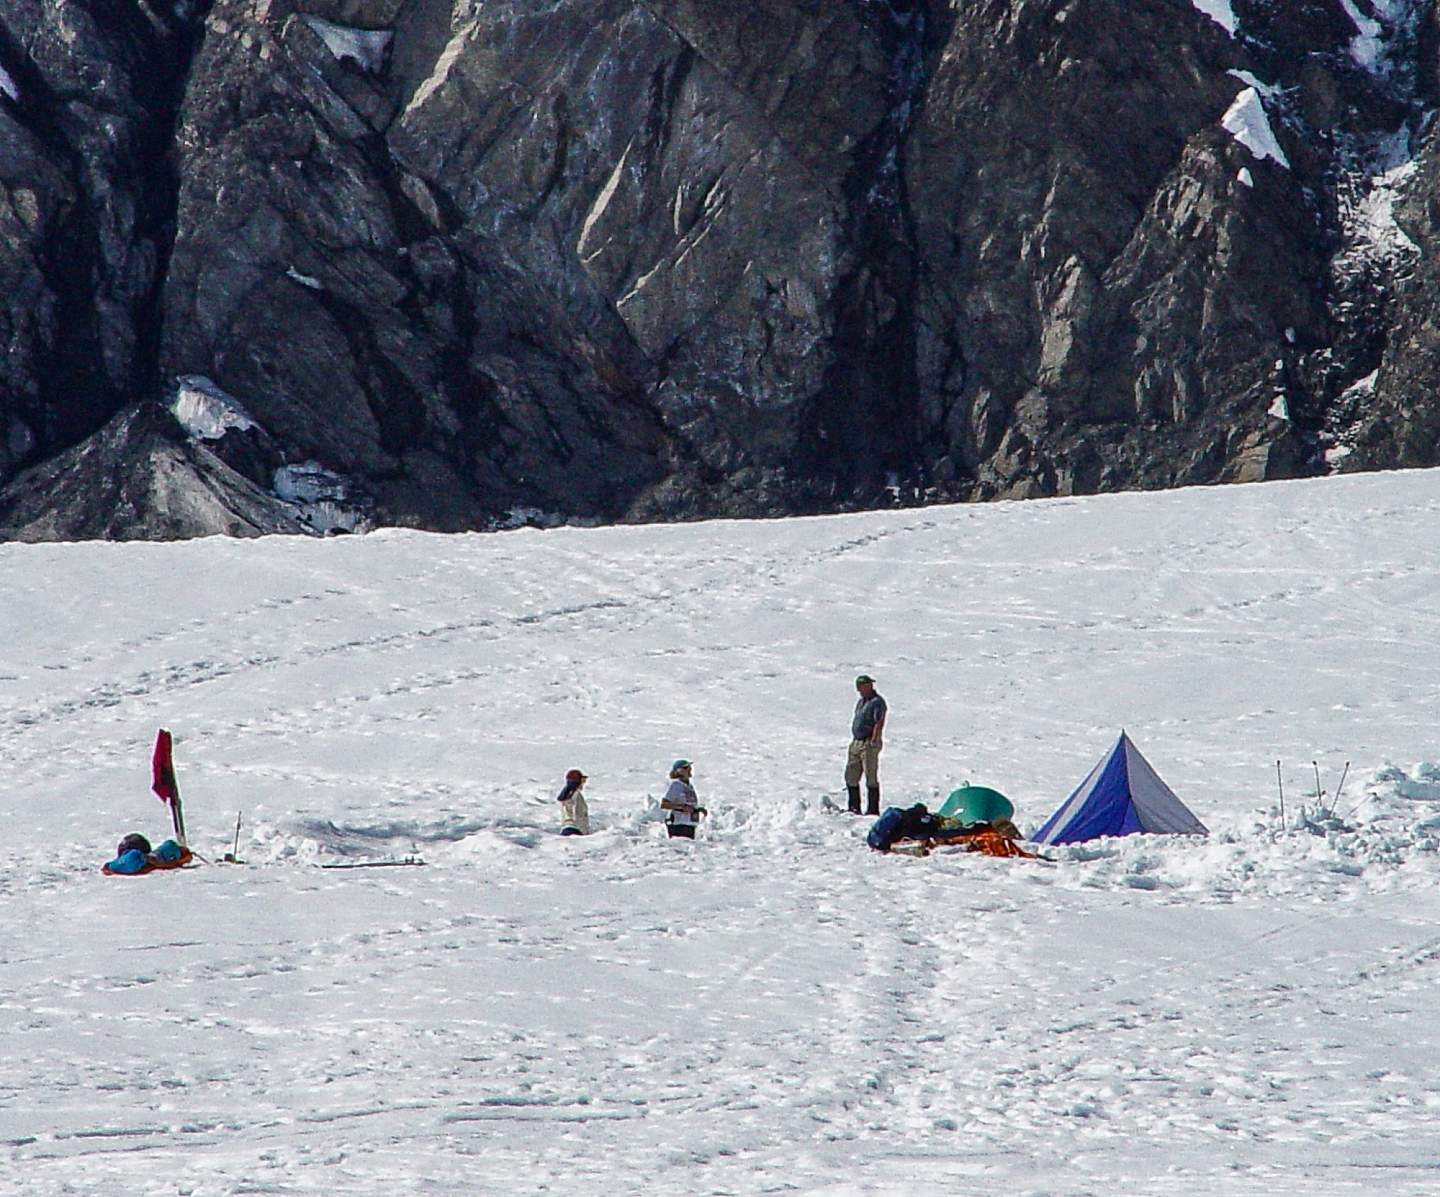 Hikers camp and explore on the snow with the Denali mountainside in the background.